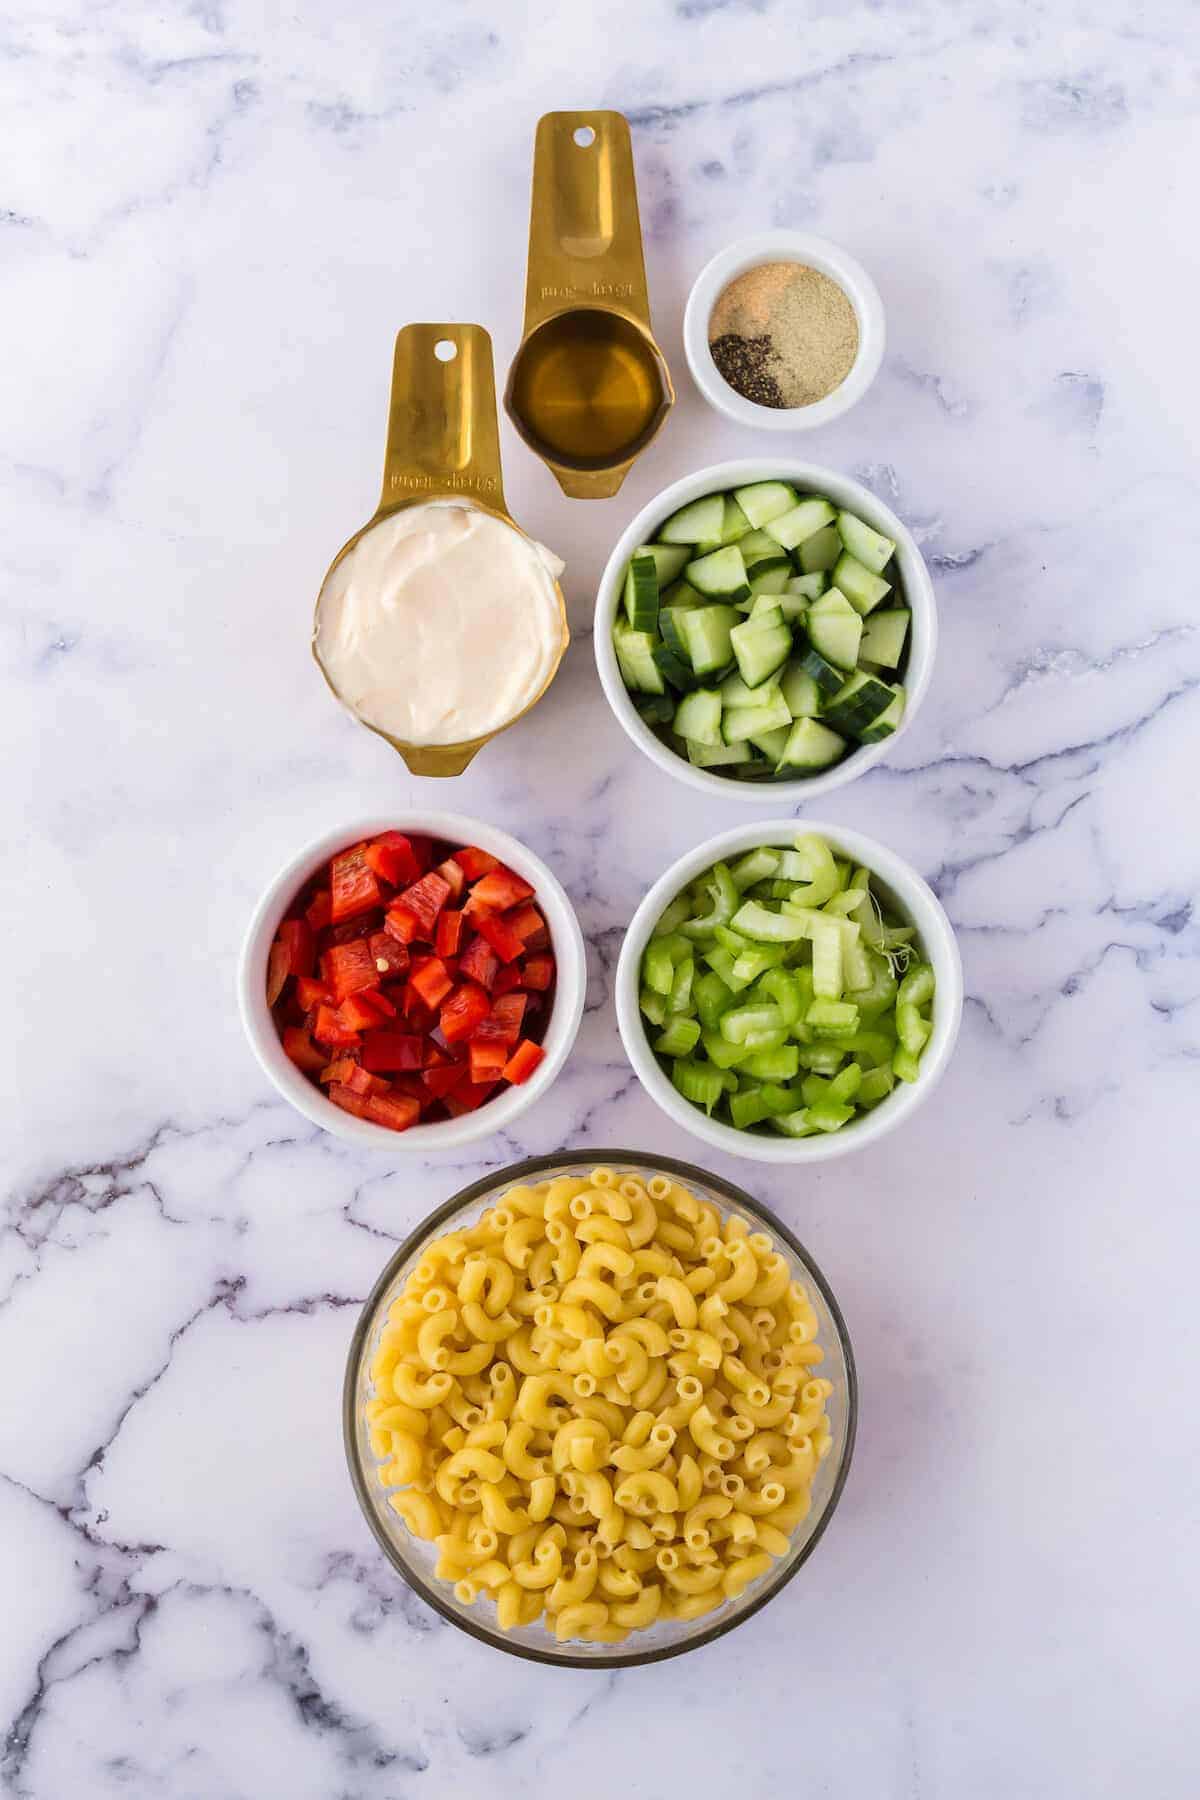 macaroni salad ingredients prepared in in small white bowls.